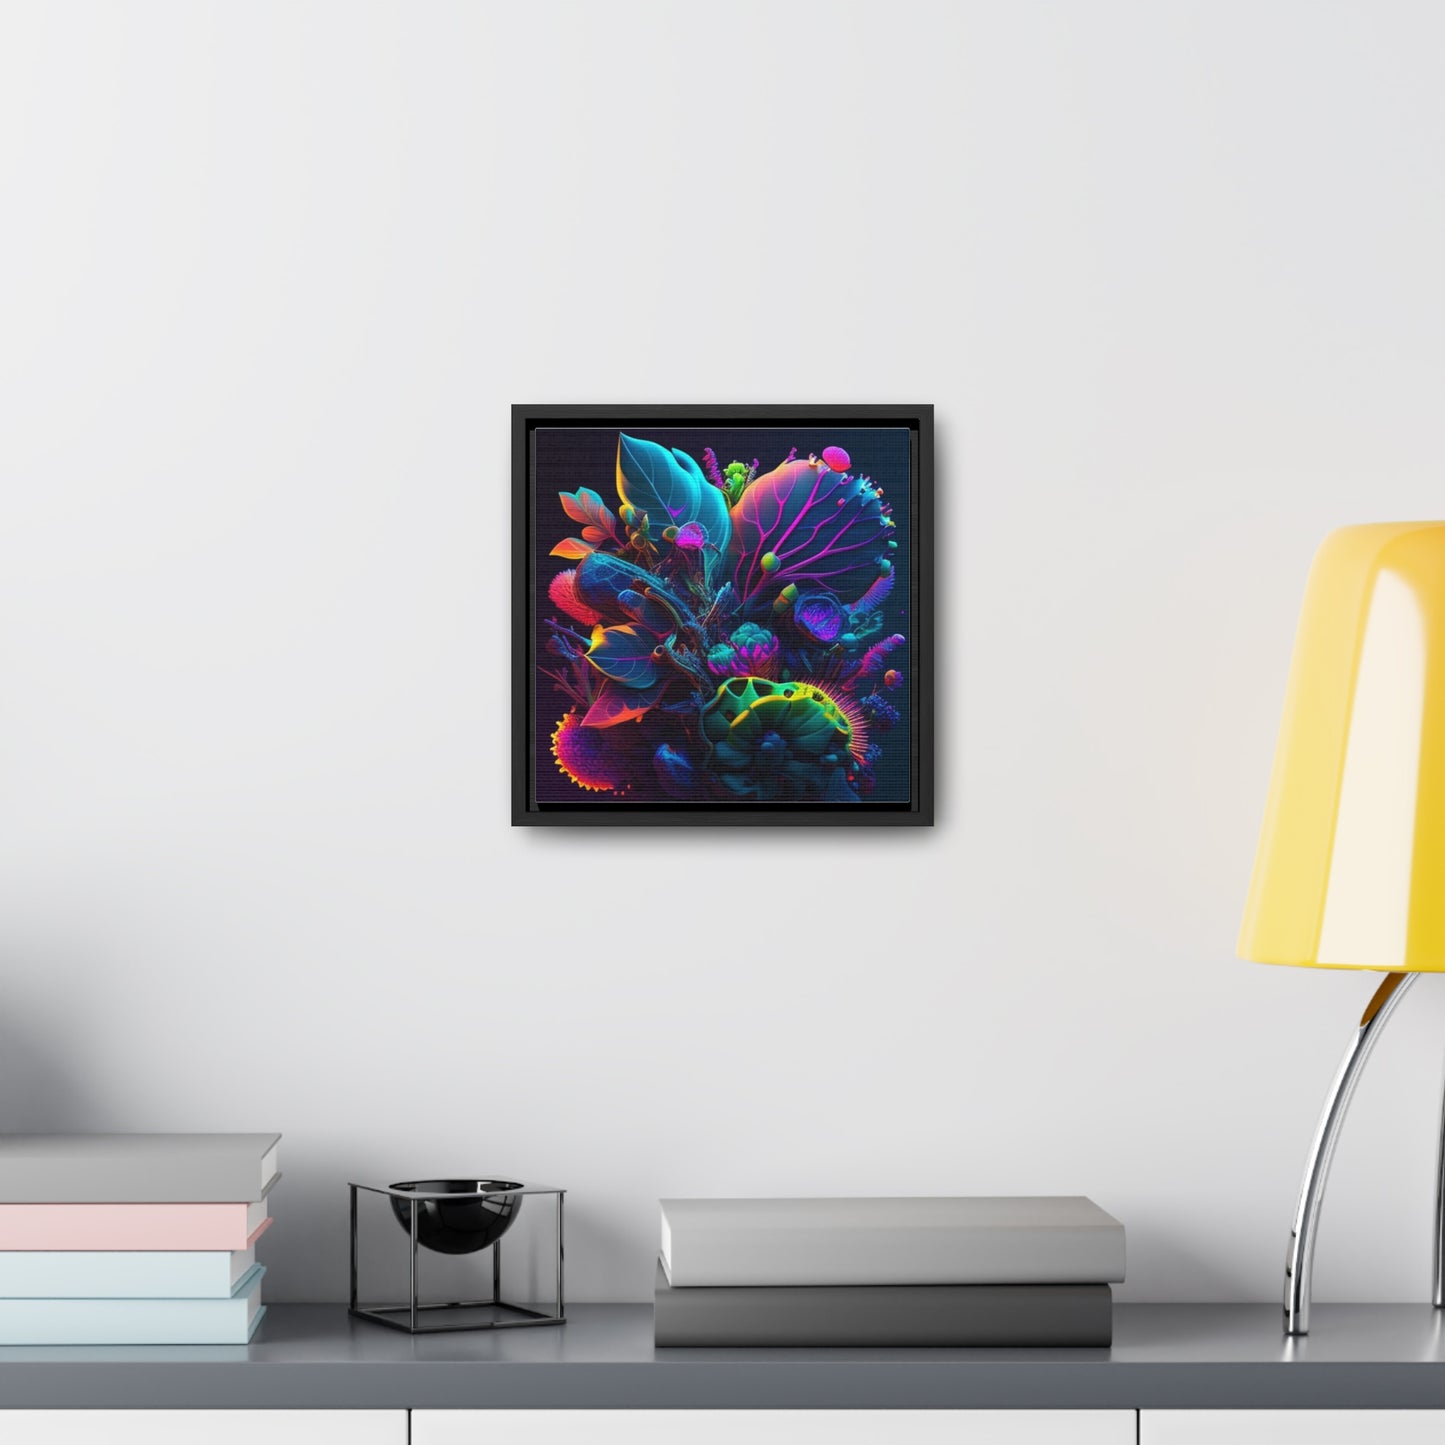 Gallery Canvas Wraps, Square Frame Macro Coral Reef 3